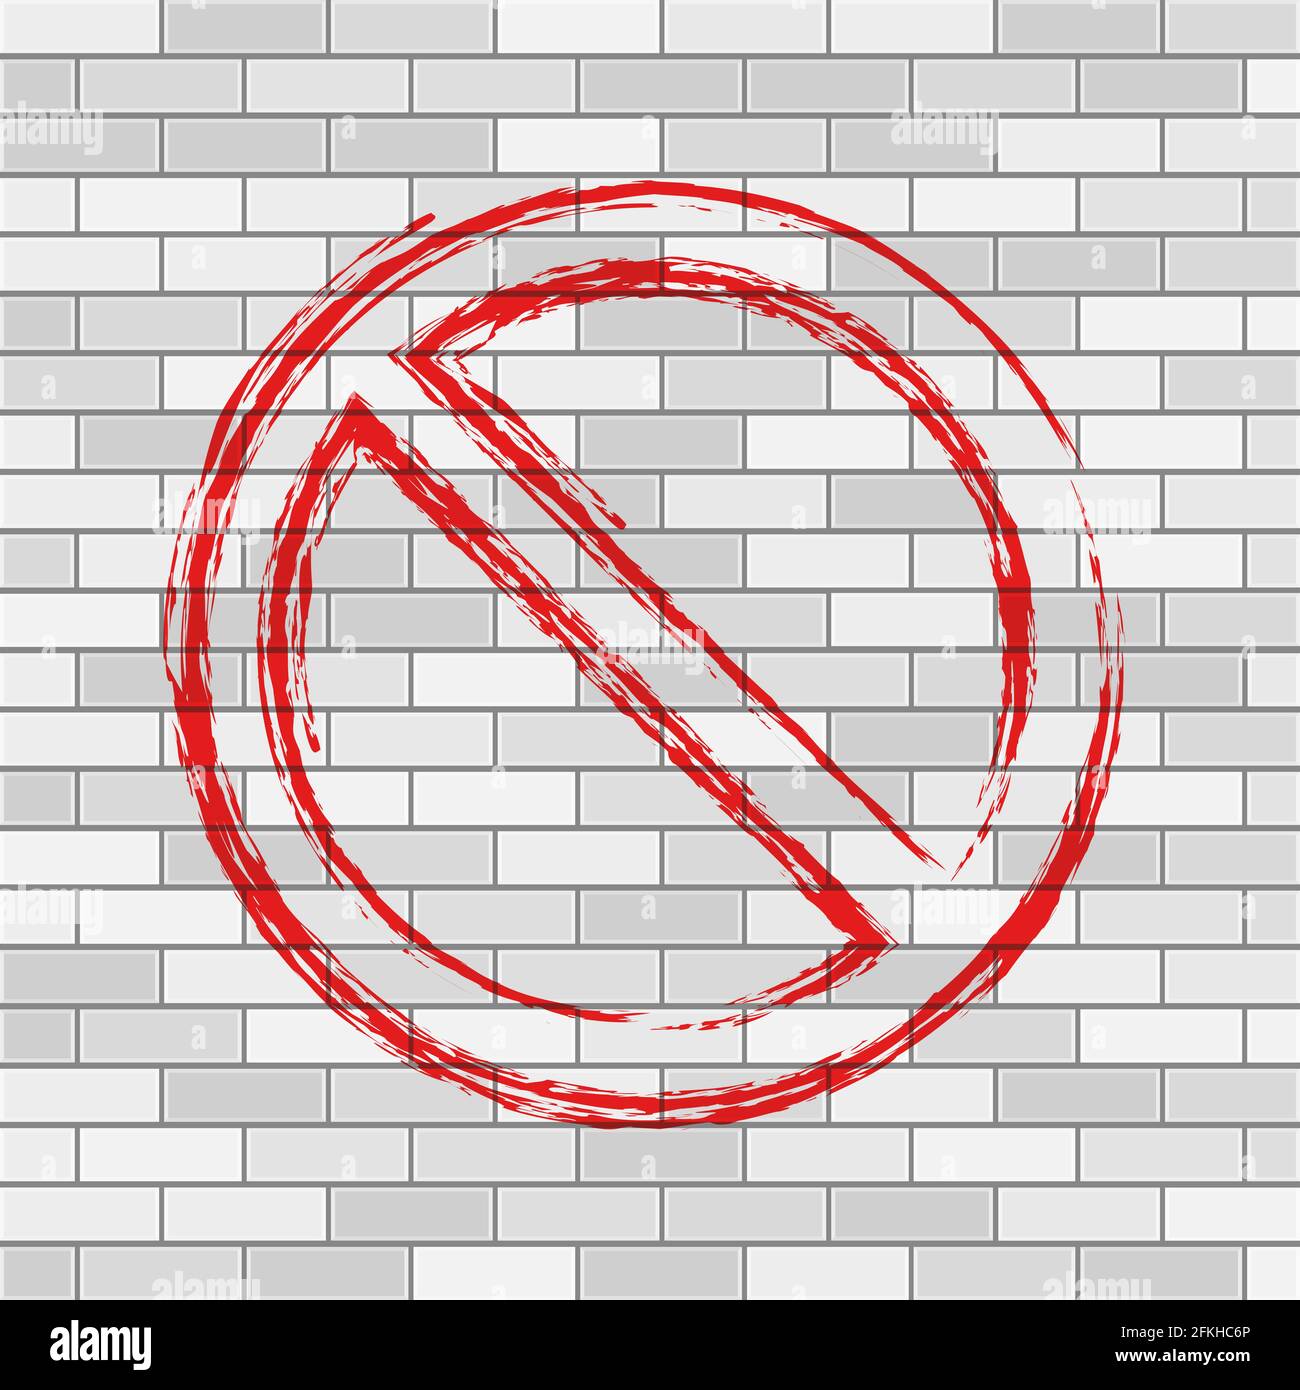 Grunge hand drawn not allowed symbol. Prohibition sign. Forbidden round sign. illustration on white brick wall. Stock Photo